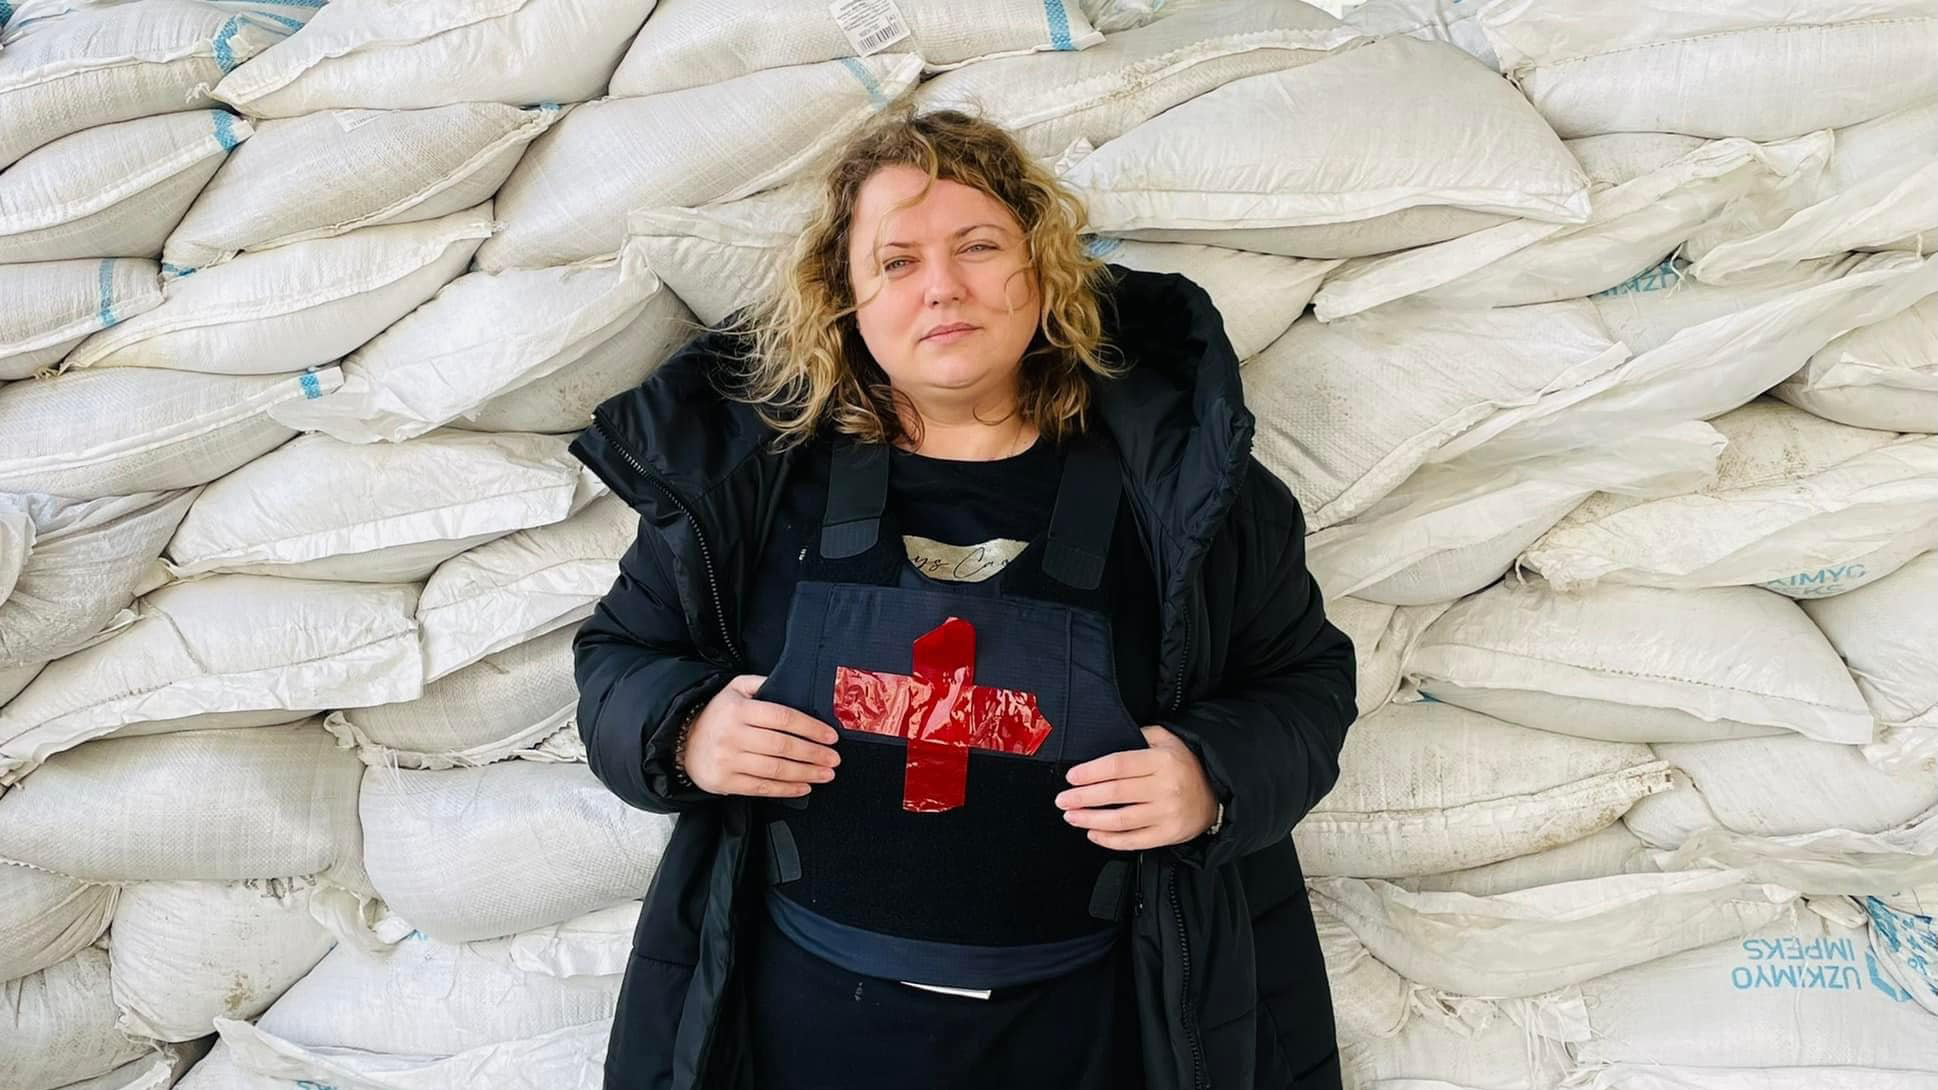 ‘This photo was taken in April 2022 by Valentina Vakulenko, my partner in volunteering at the maternity hospital in the Obolon district of Kyiv, where we brought medicine. Sandbags lined the entire central entrance, which was made of glass, so that in the event of shelling or explosions, elements and fragments of explosives or bullets could not get inside and injure people,’ shared Yankina.